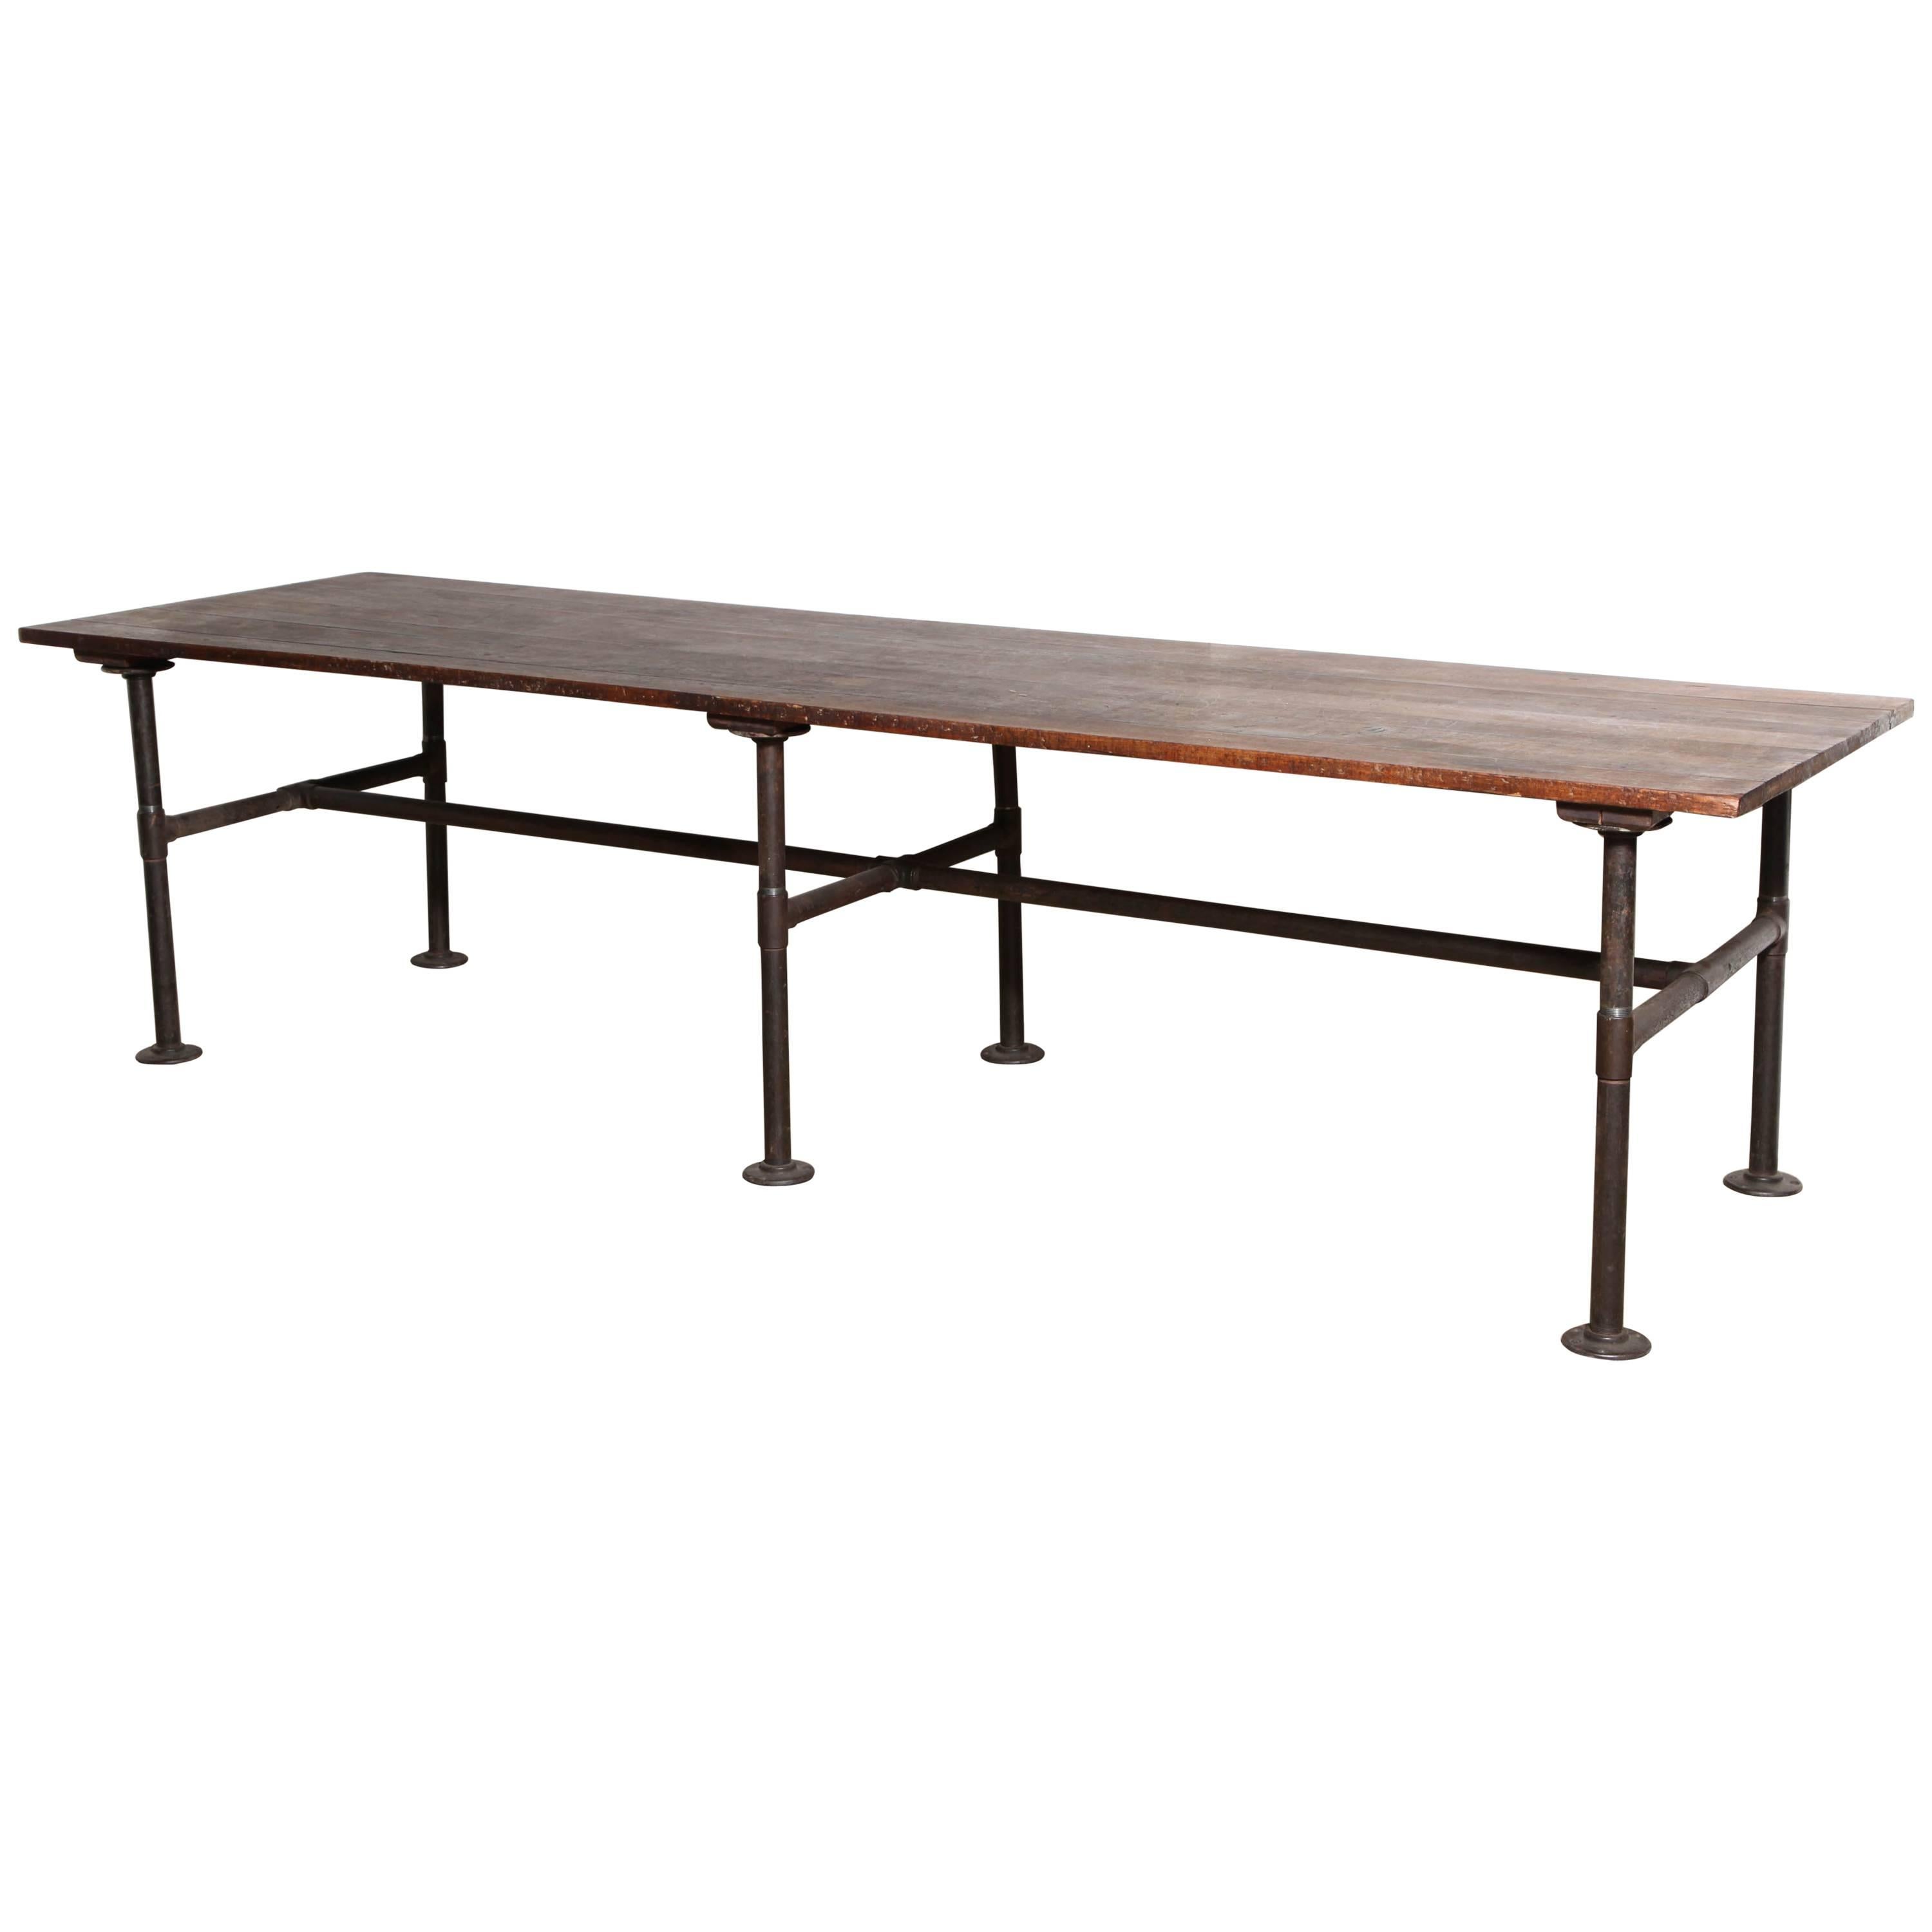 Monumental 19th Century Ten Foot Solid Black Walnut and Iron Industrial Table